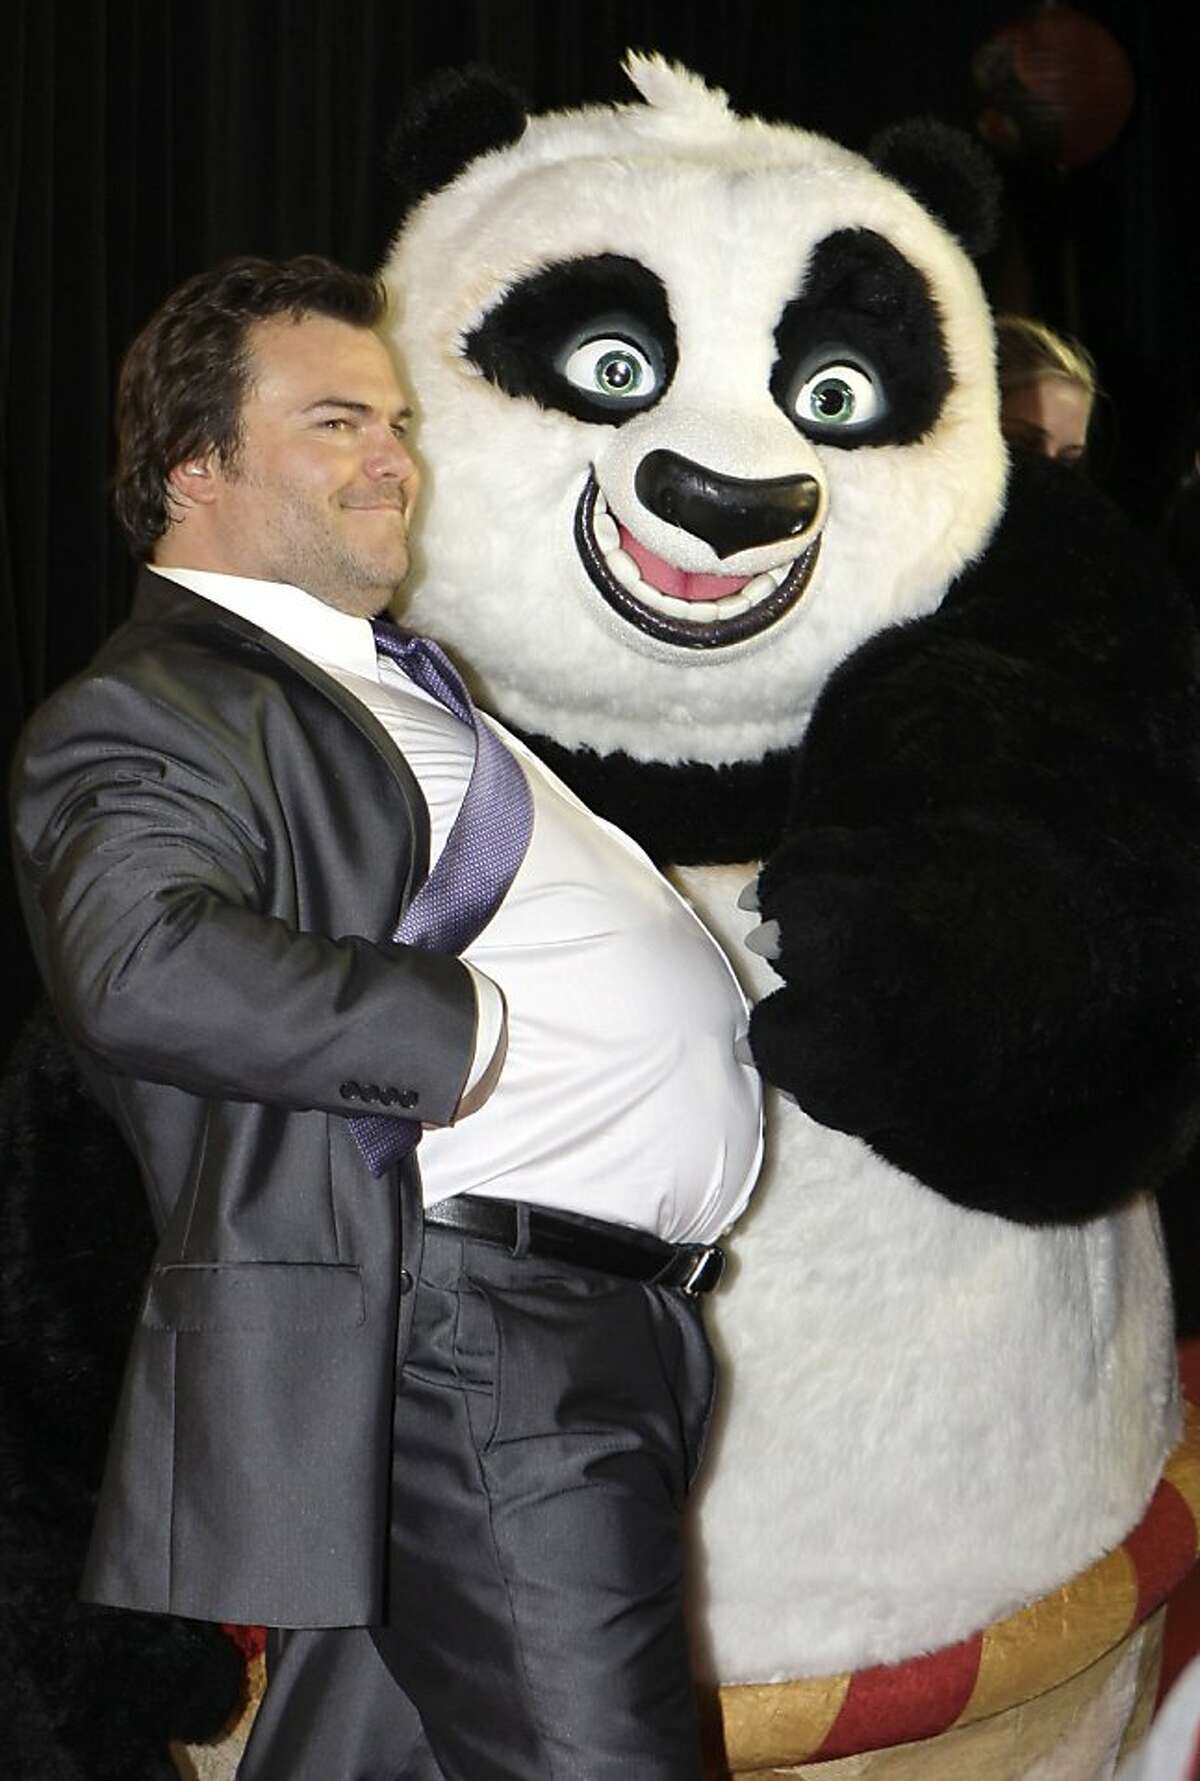 U.S. actor Jack Black poses with a panda character as he attends the Australian premiere of the movie Kung Fu Panda 2 in Sydney, Monday, June 13, 2011.